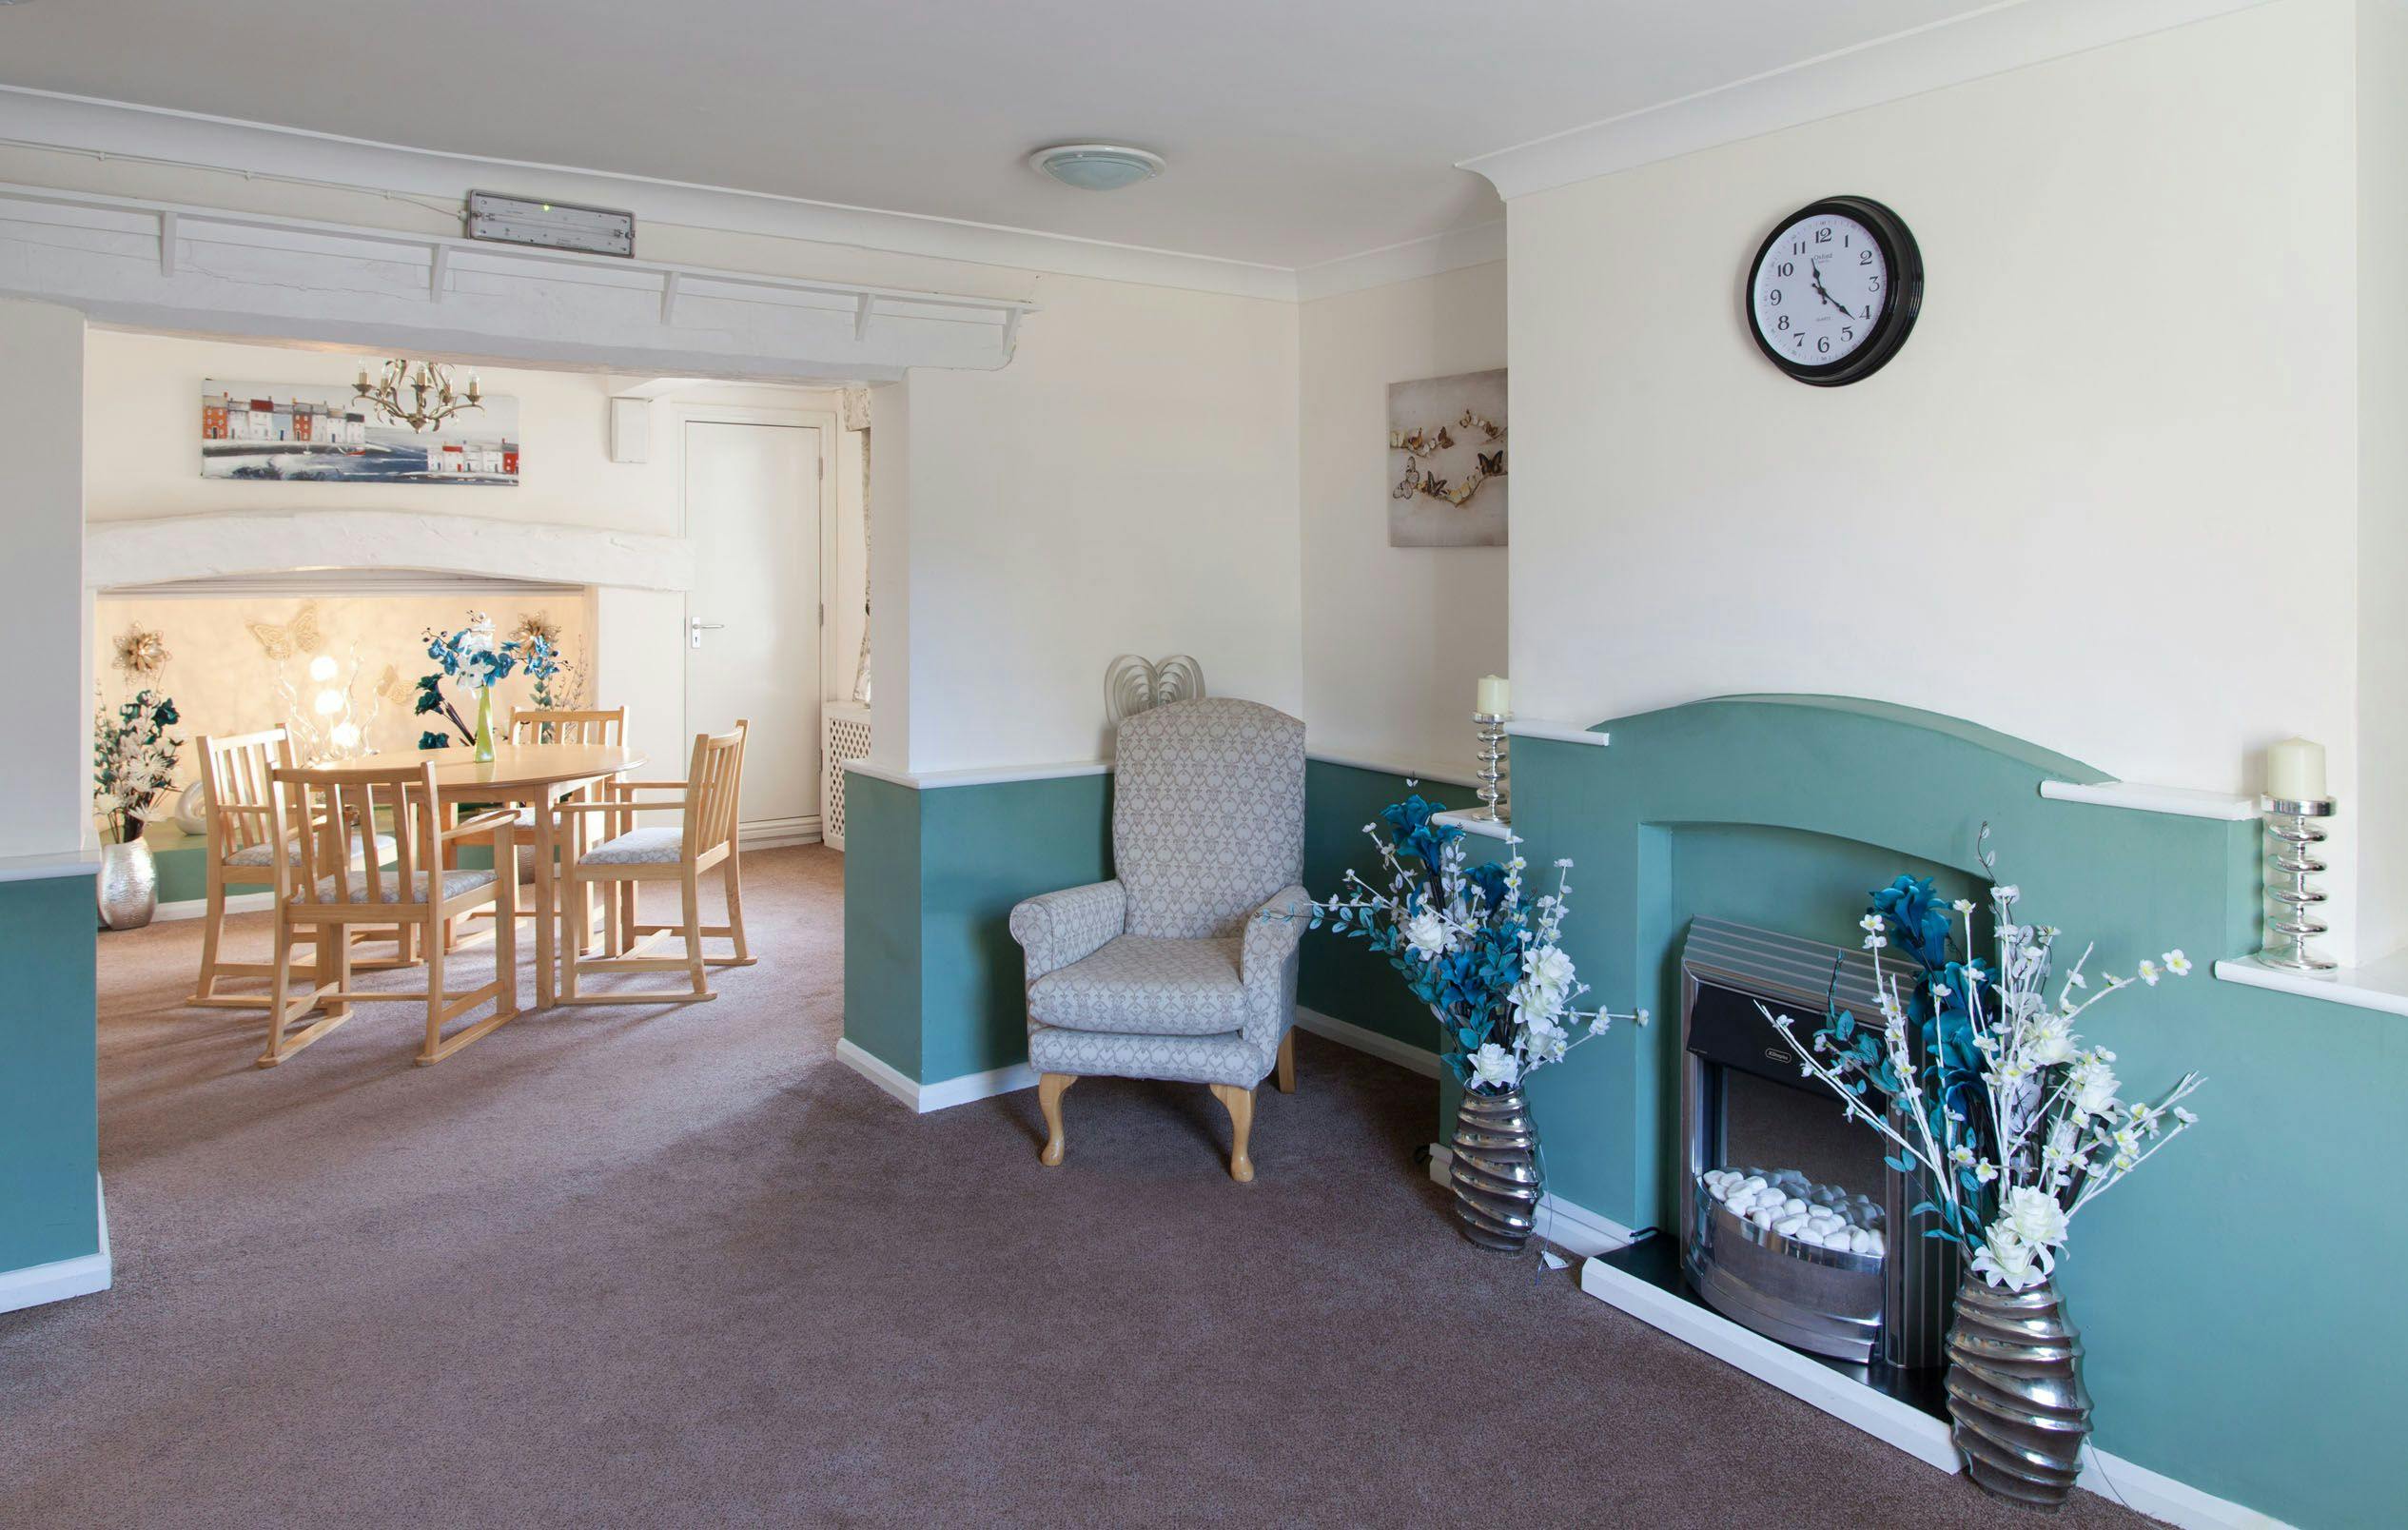 The Gables care home